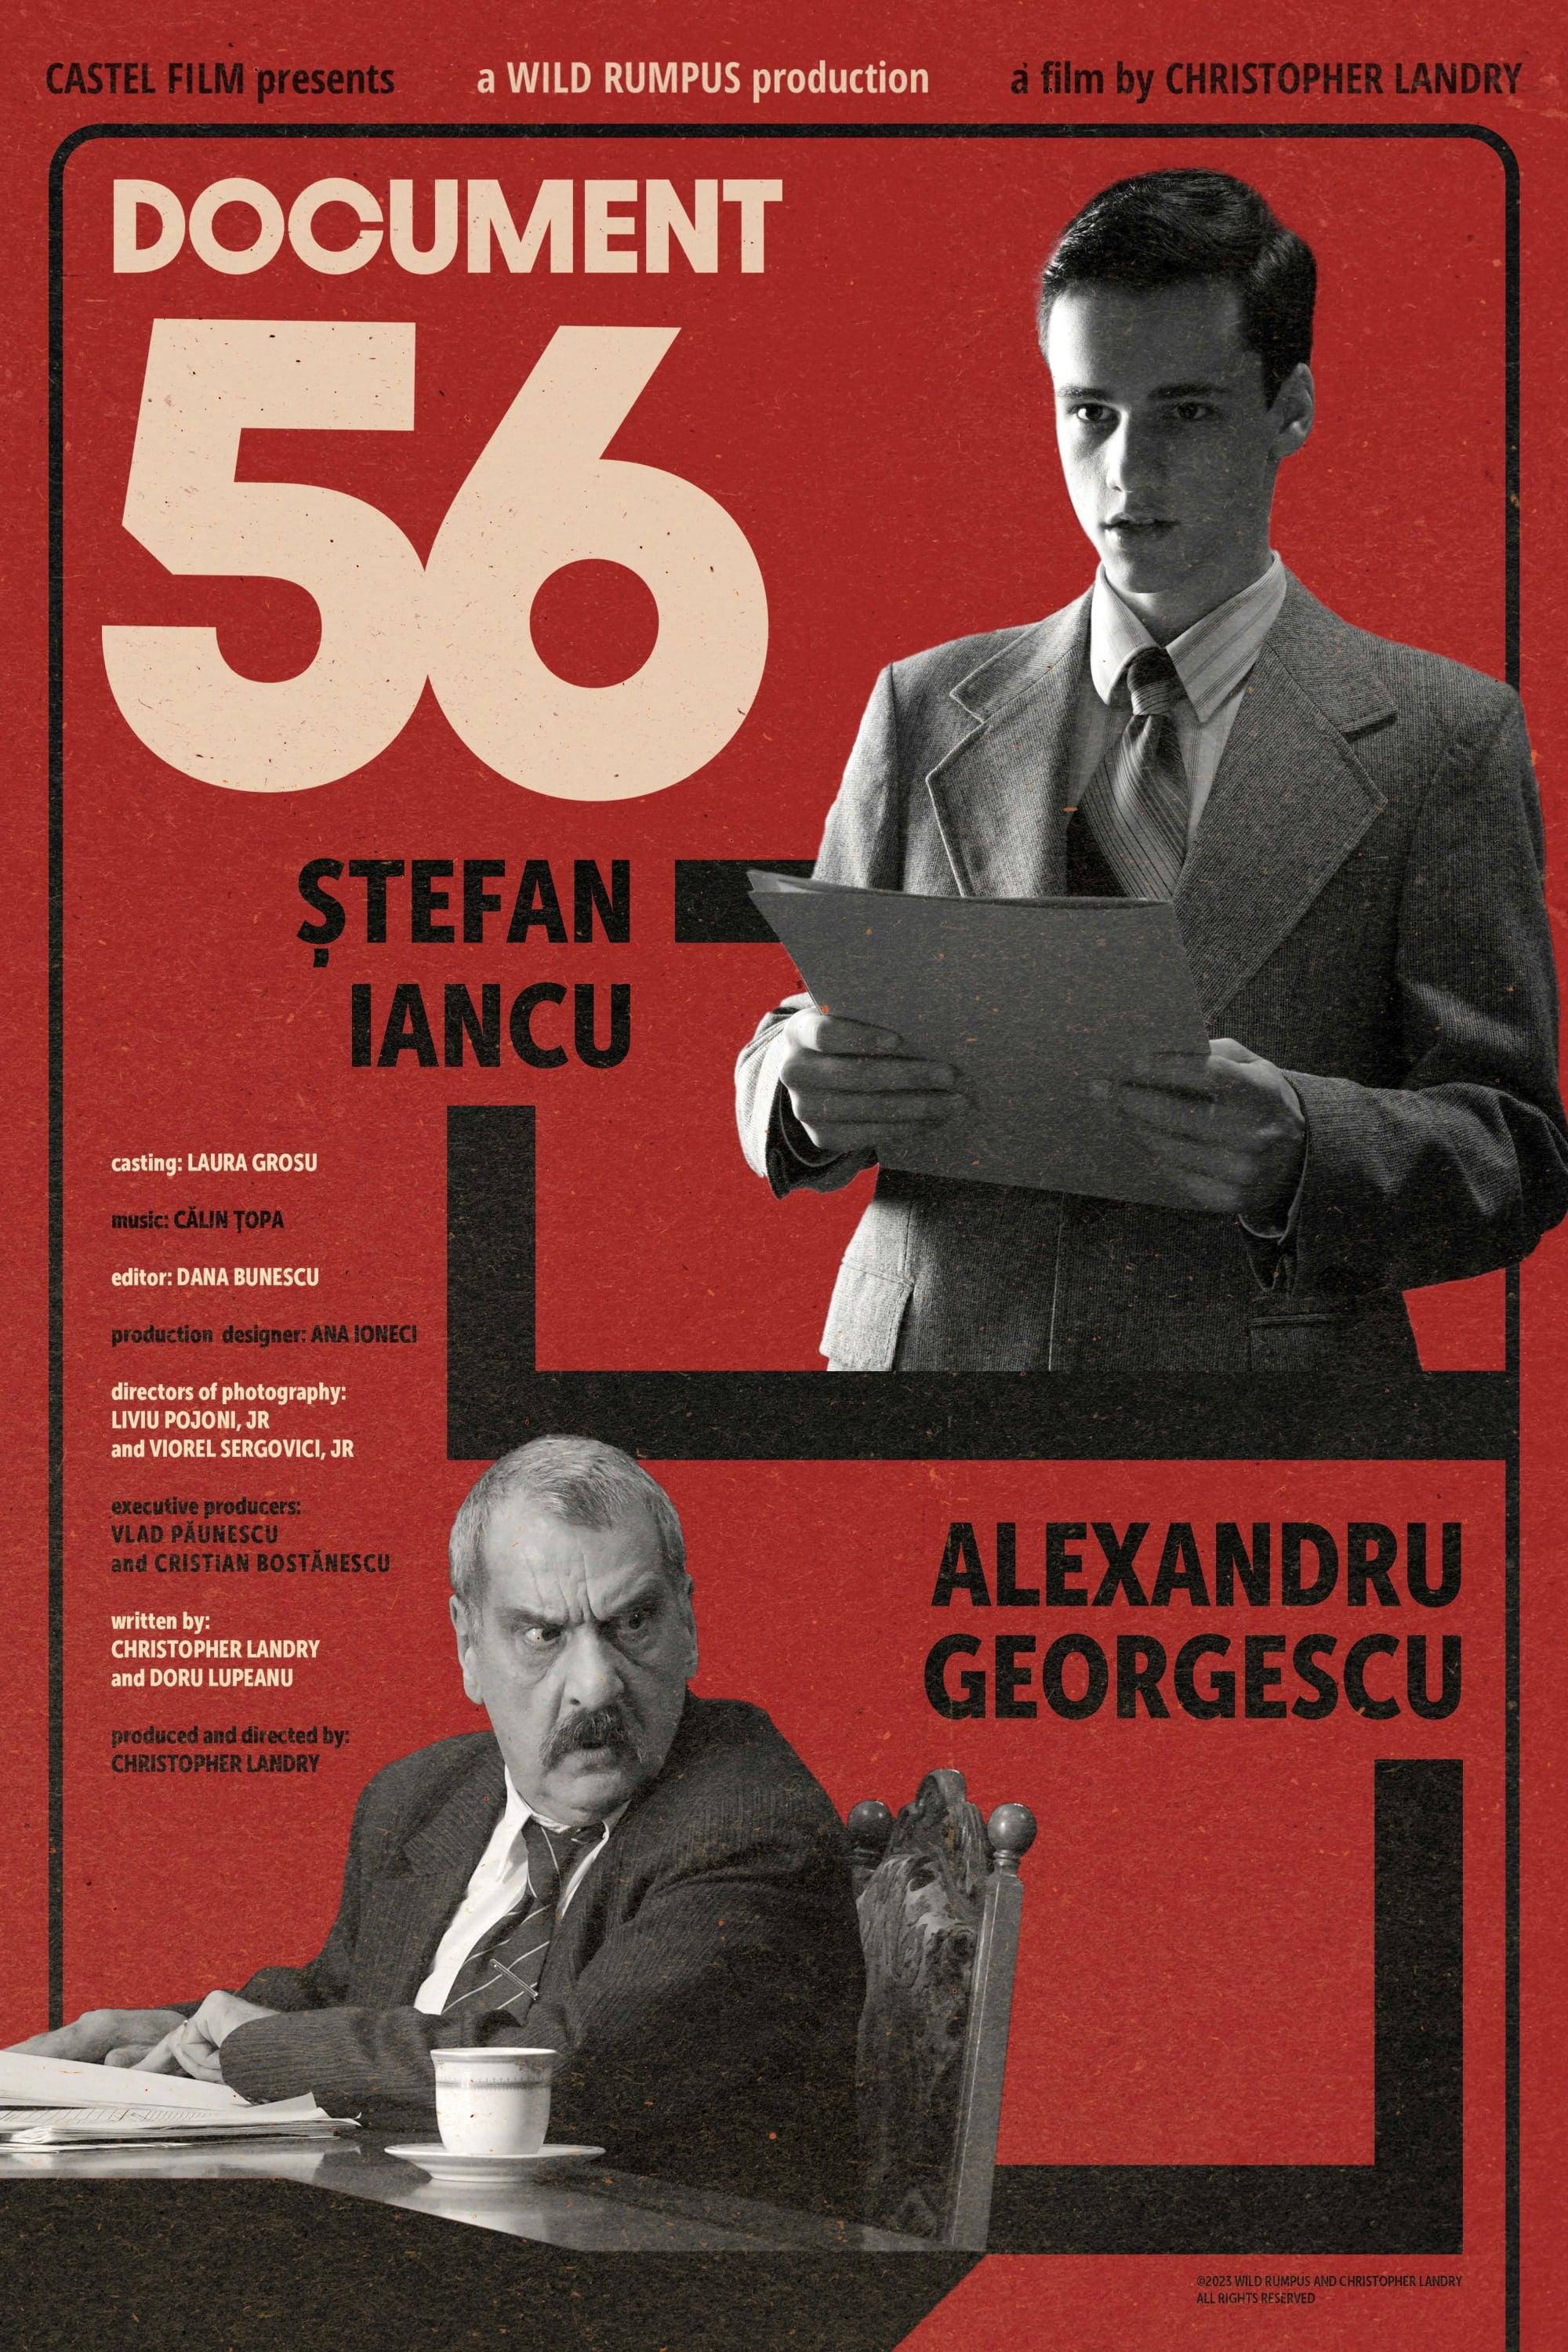 Document 56 poster